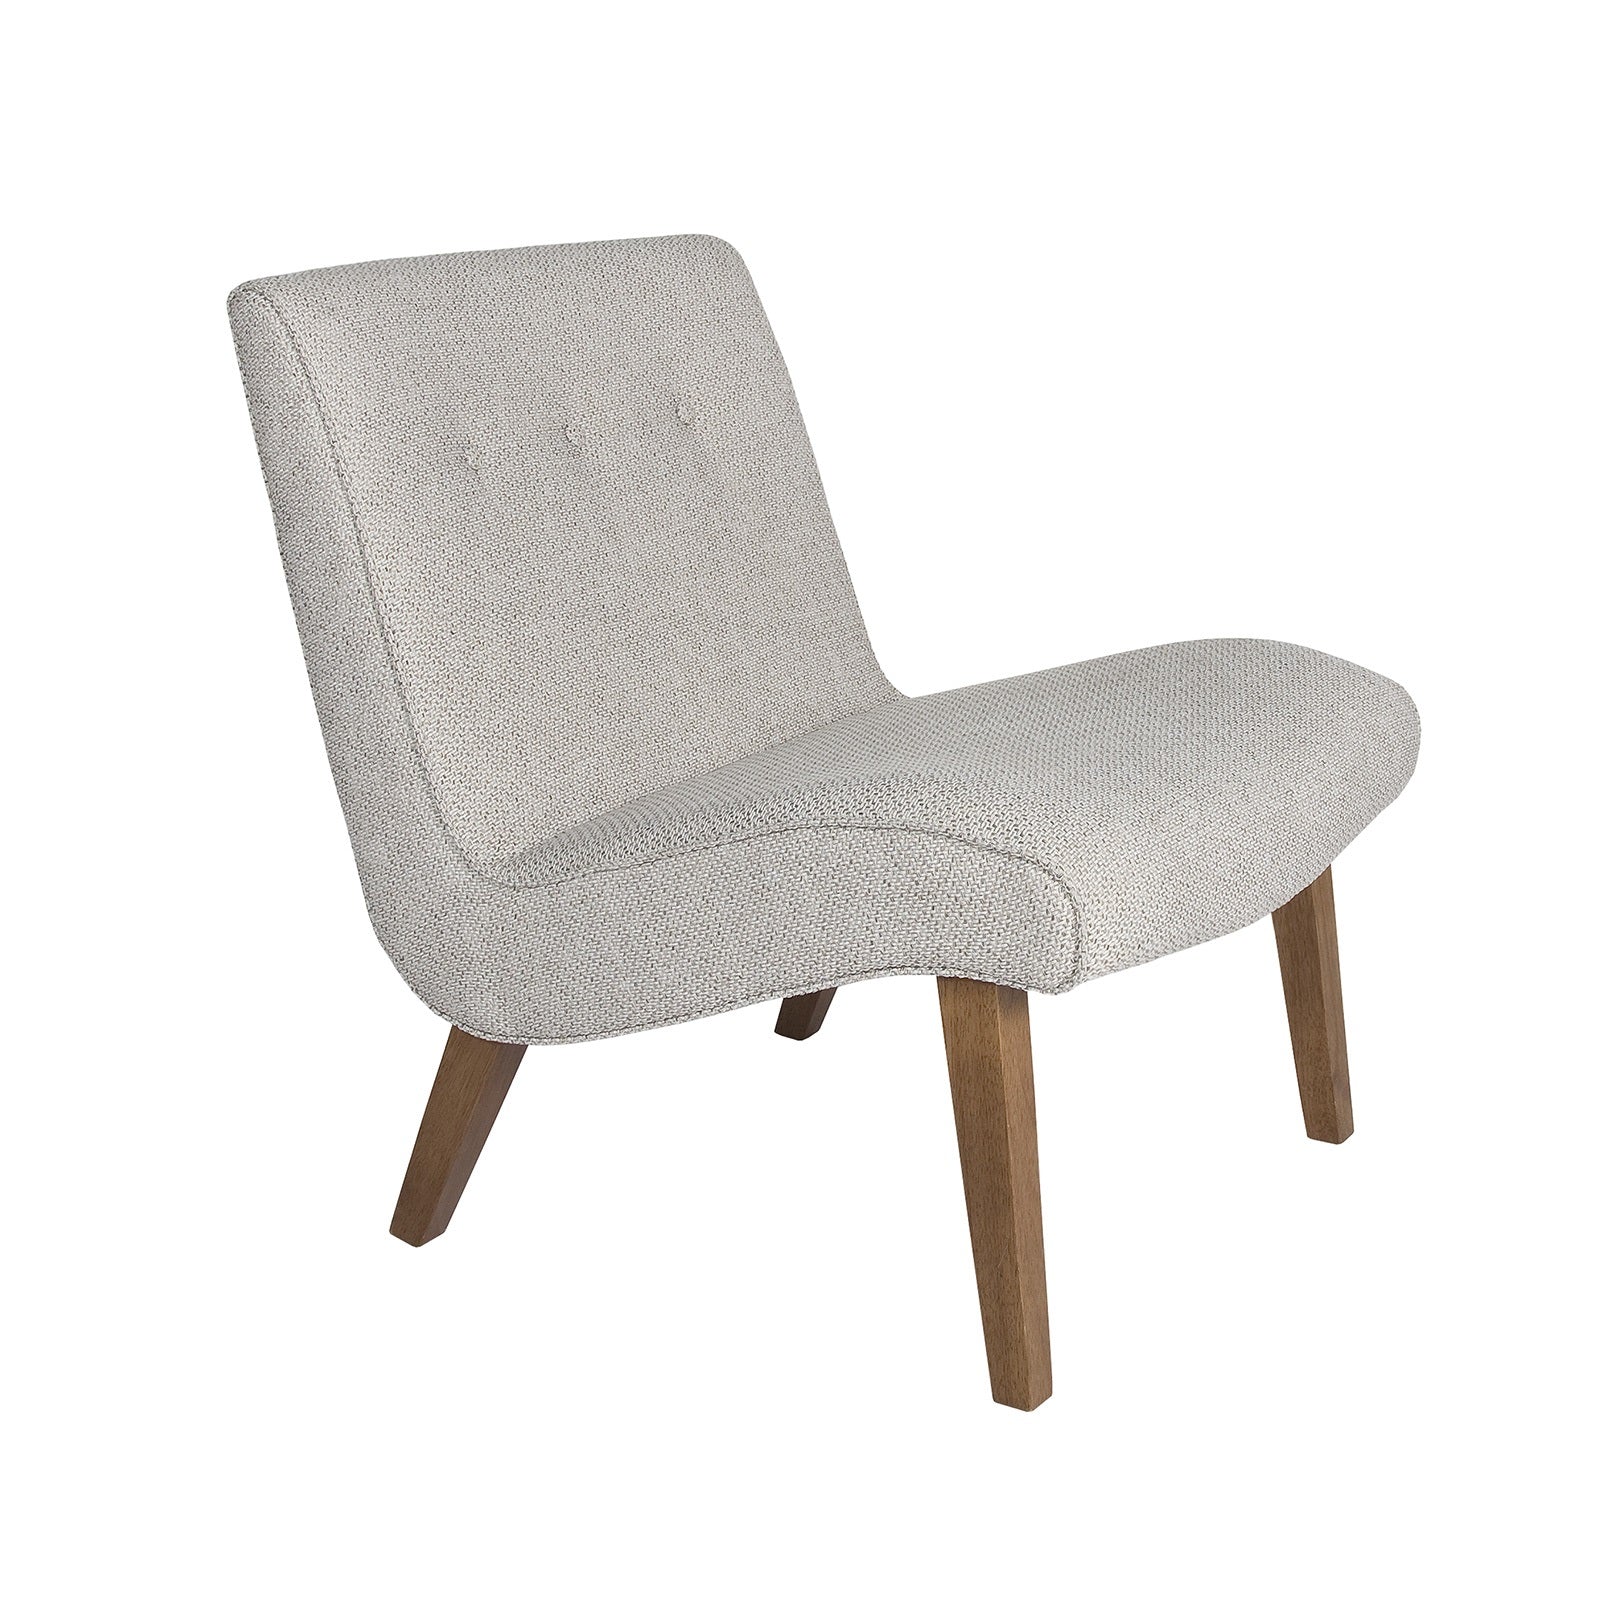 Fifi Occasional Chair – Oatmeal with Walnut Legs